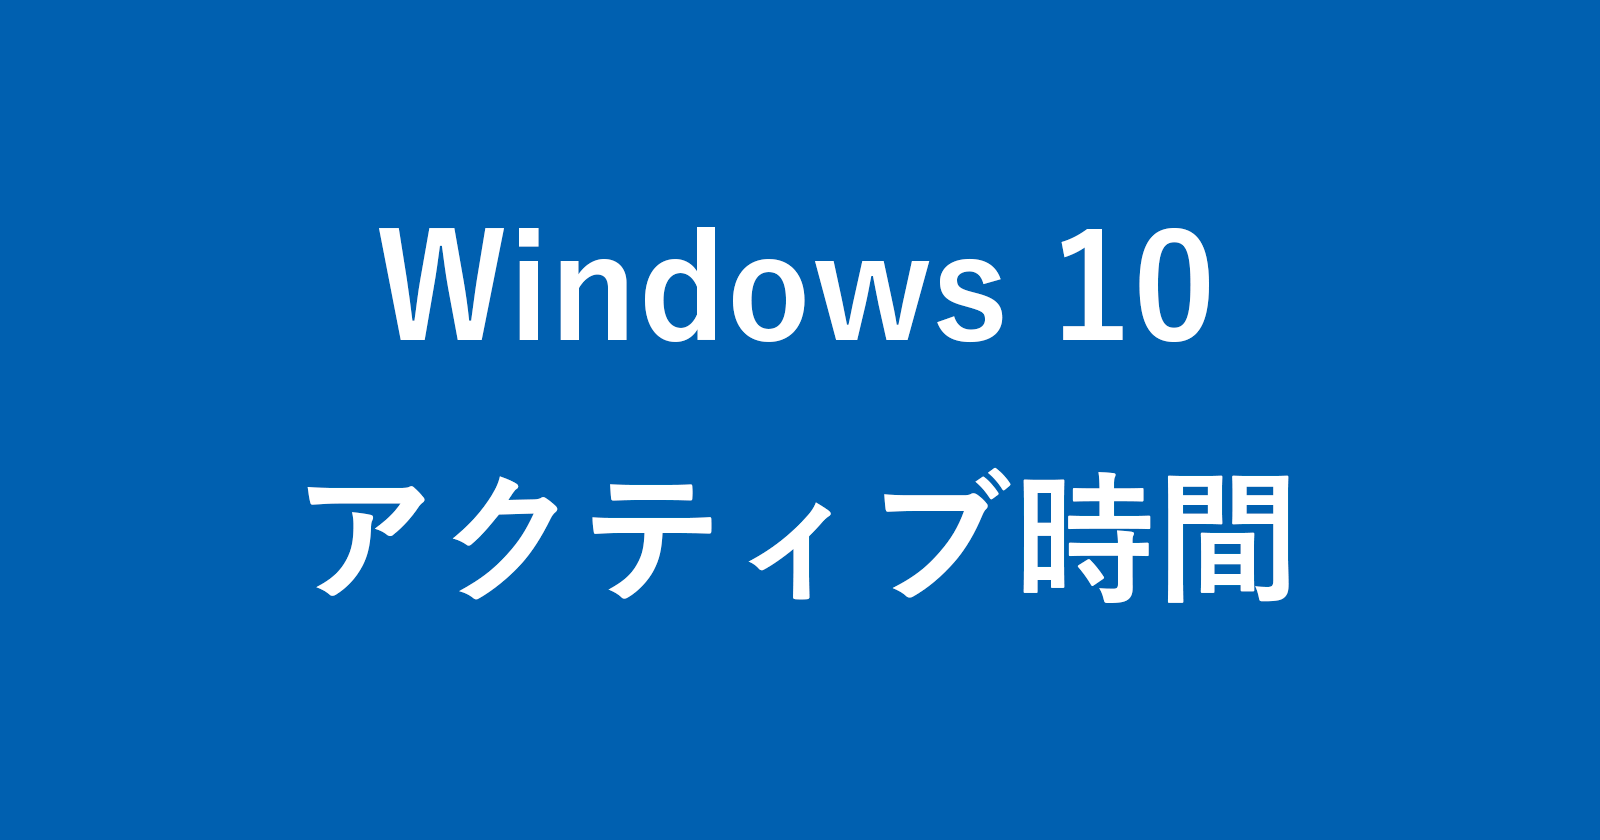 windows 10 active time